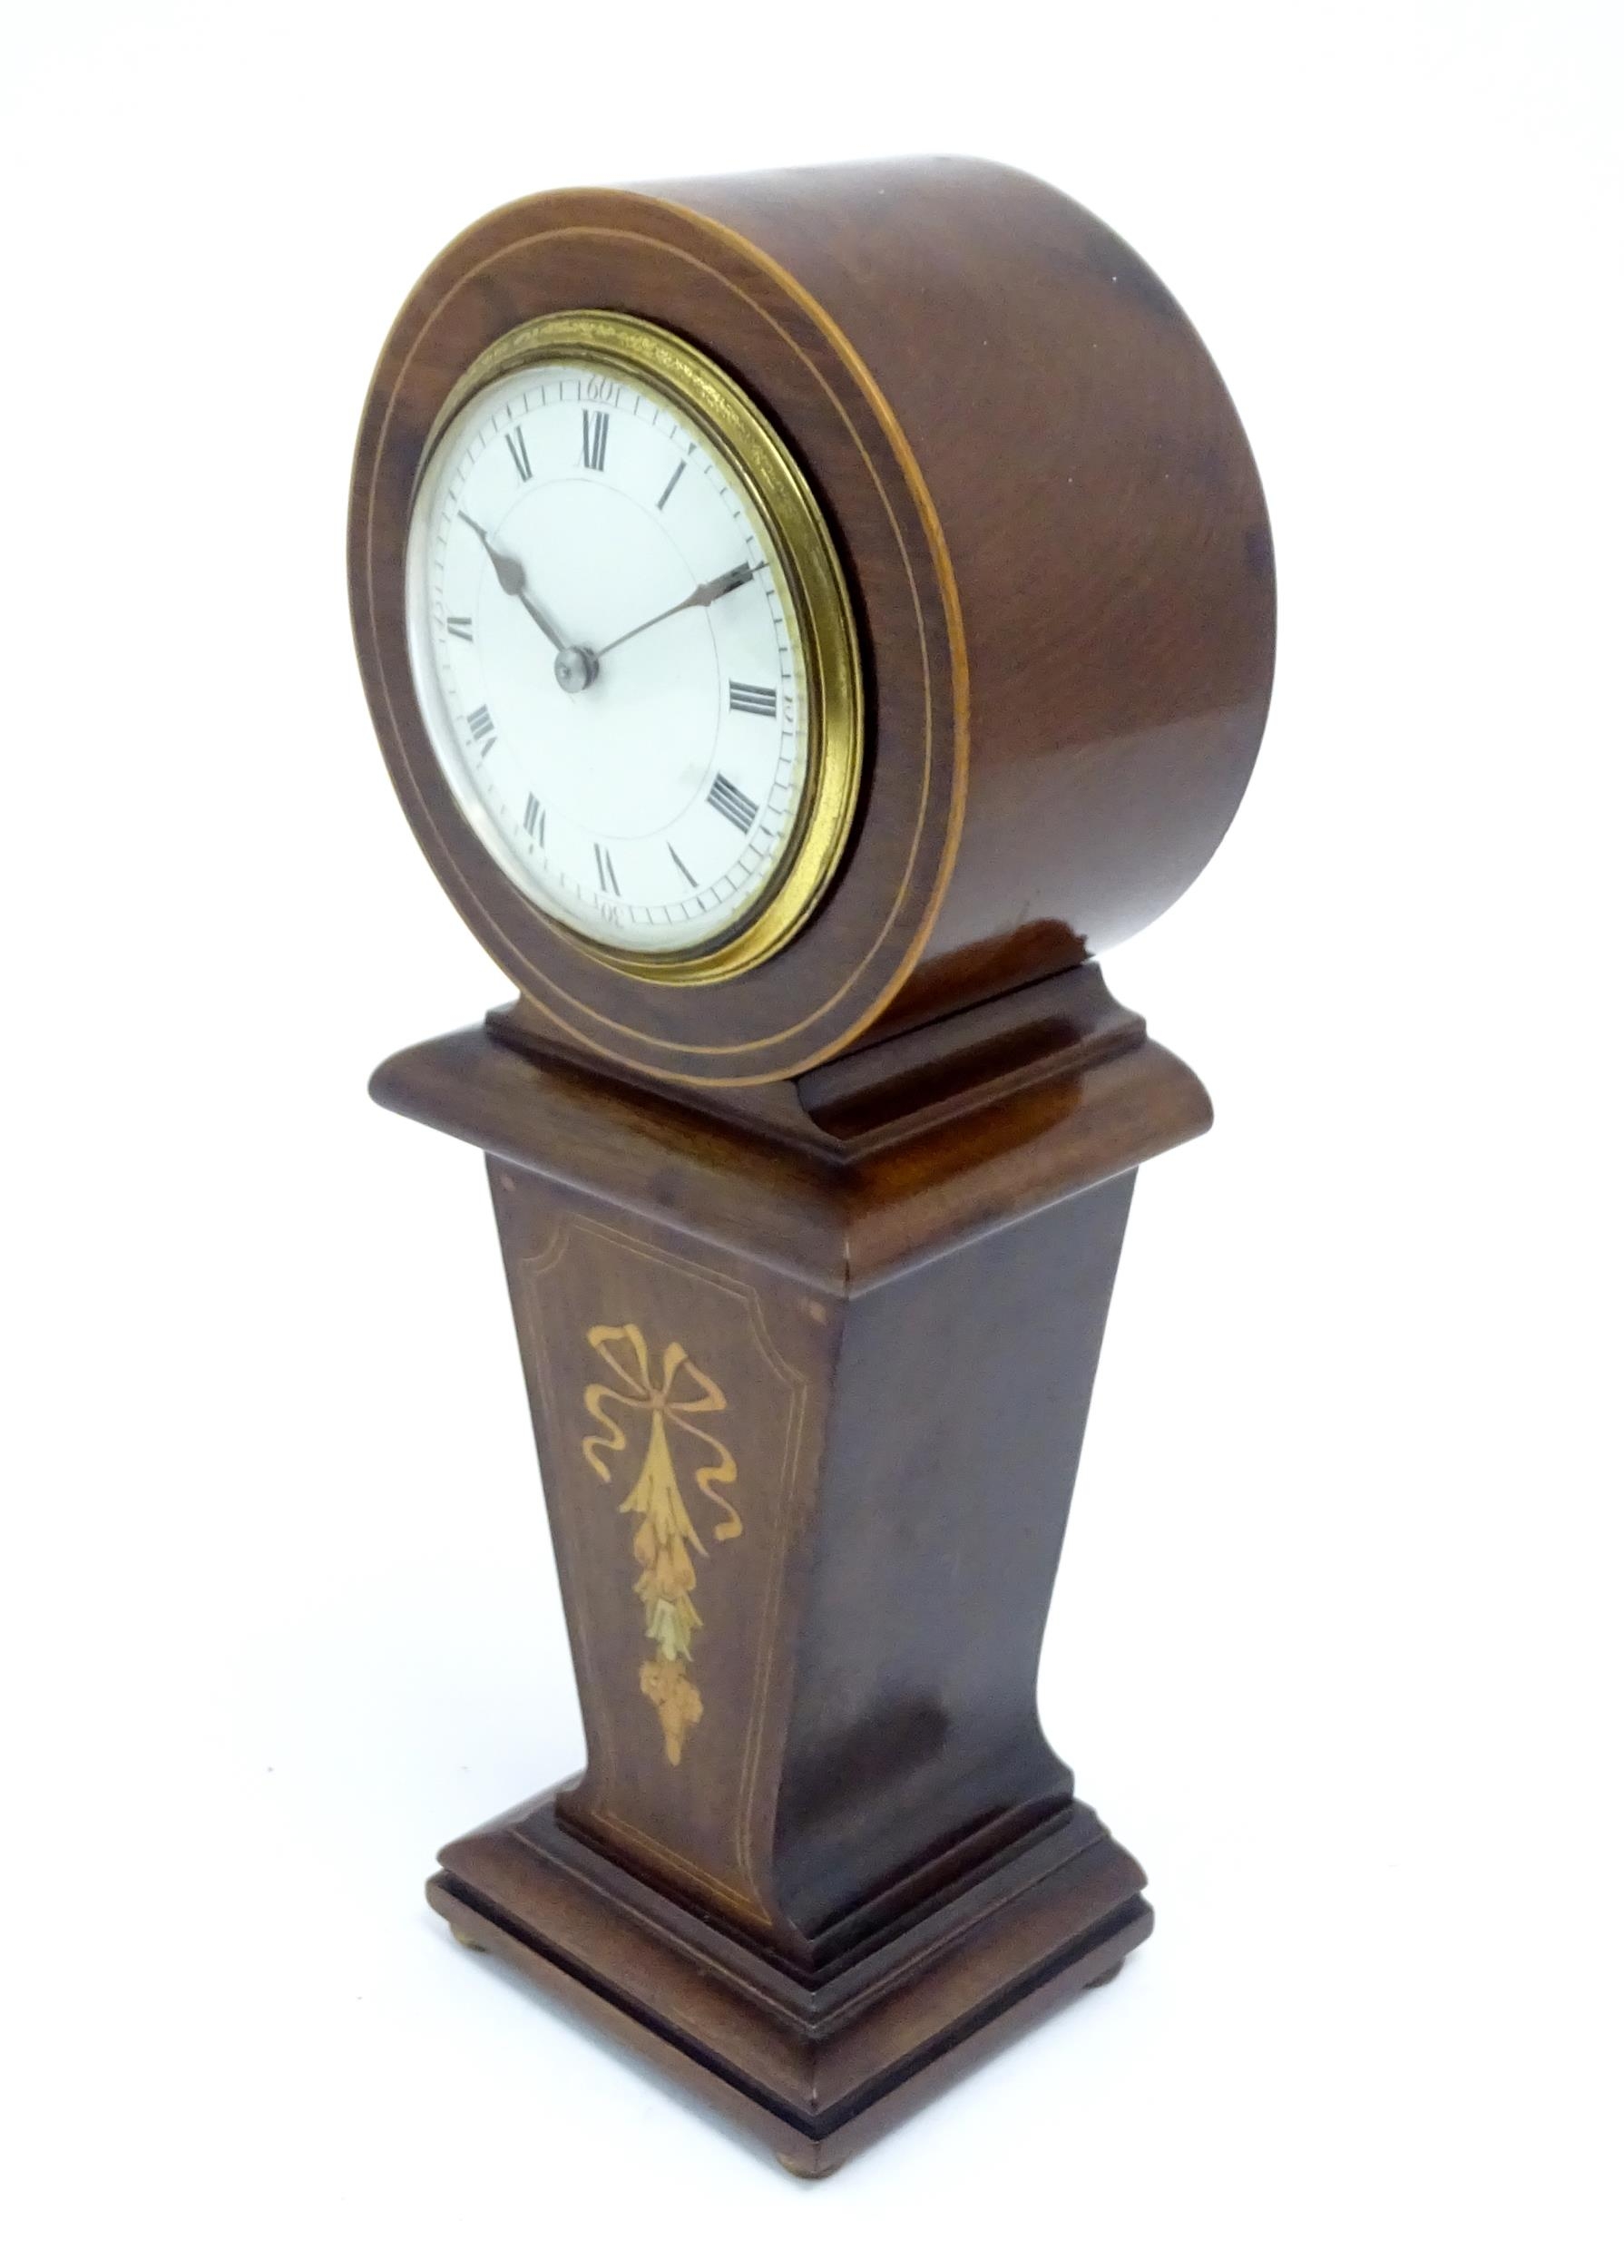 A mahogany mantle clock with inlaid detail and white enamel dial with movement by Duverdrey & - Image 4 of 9